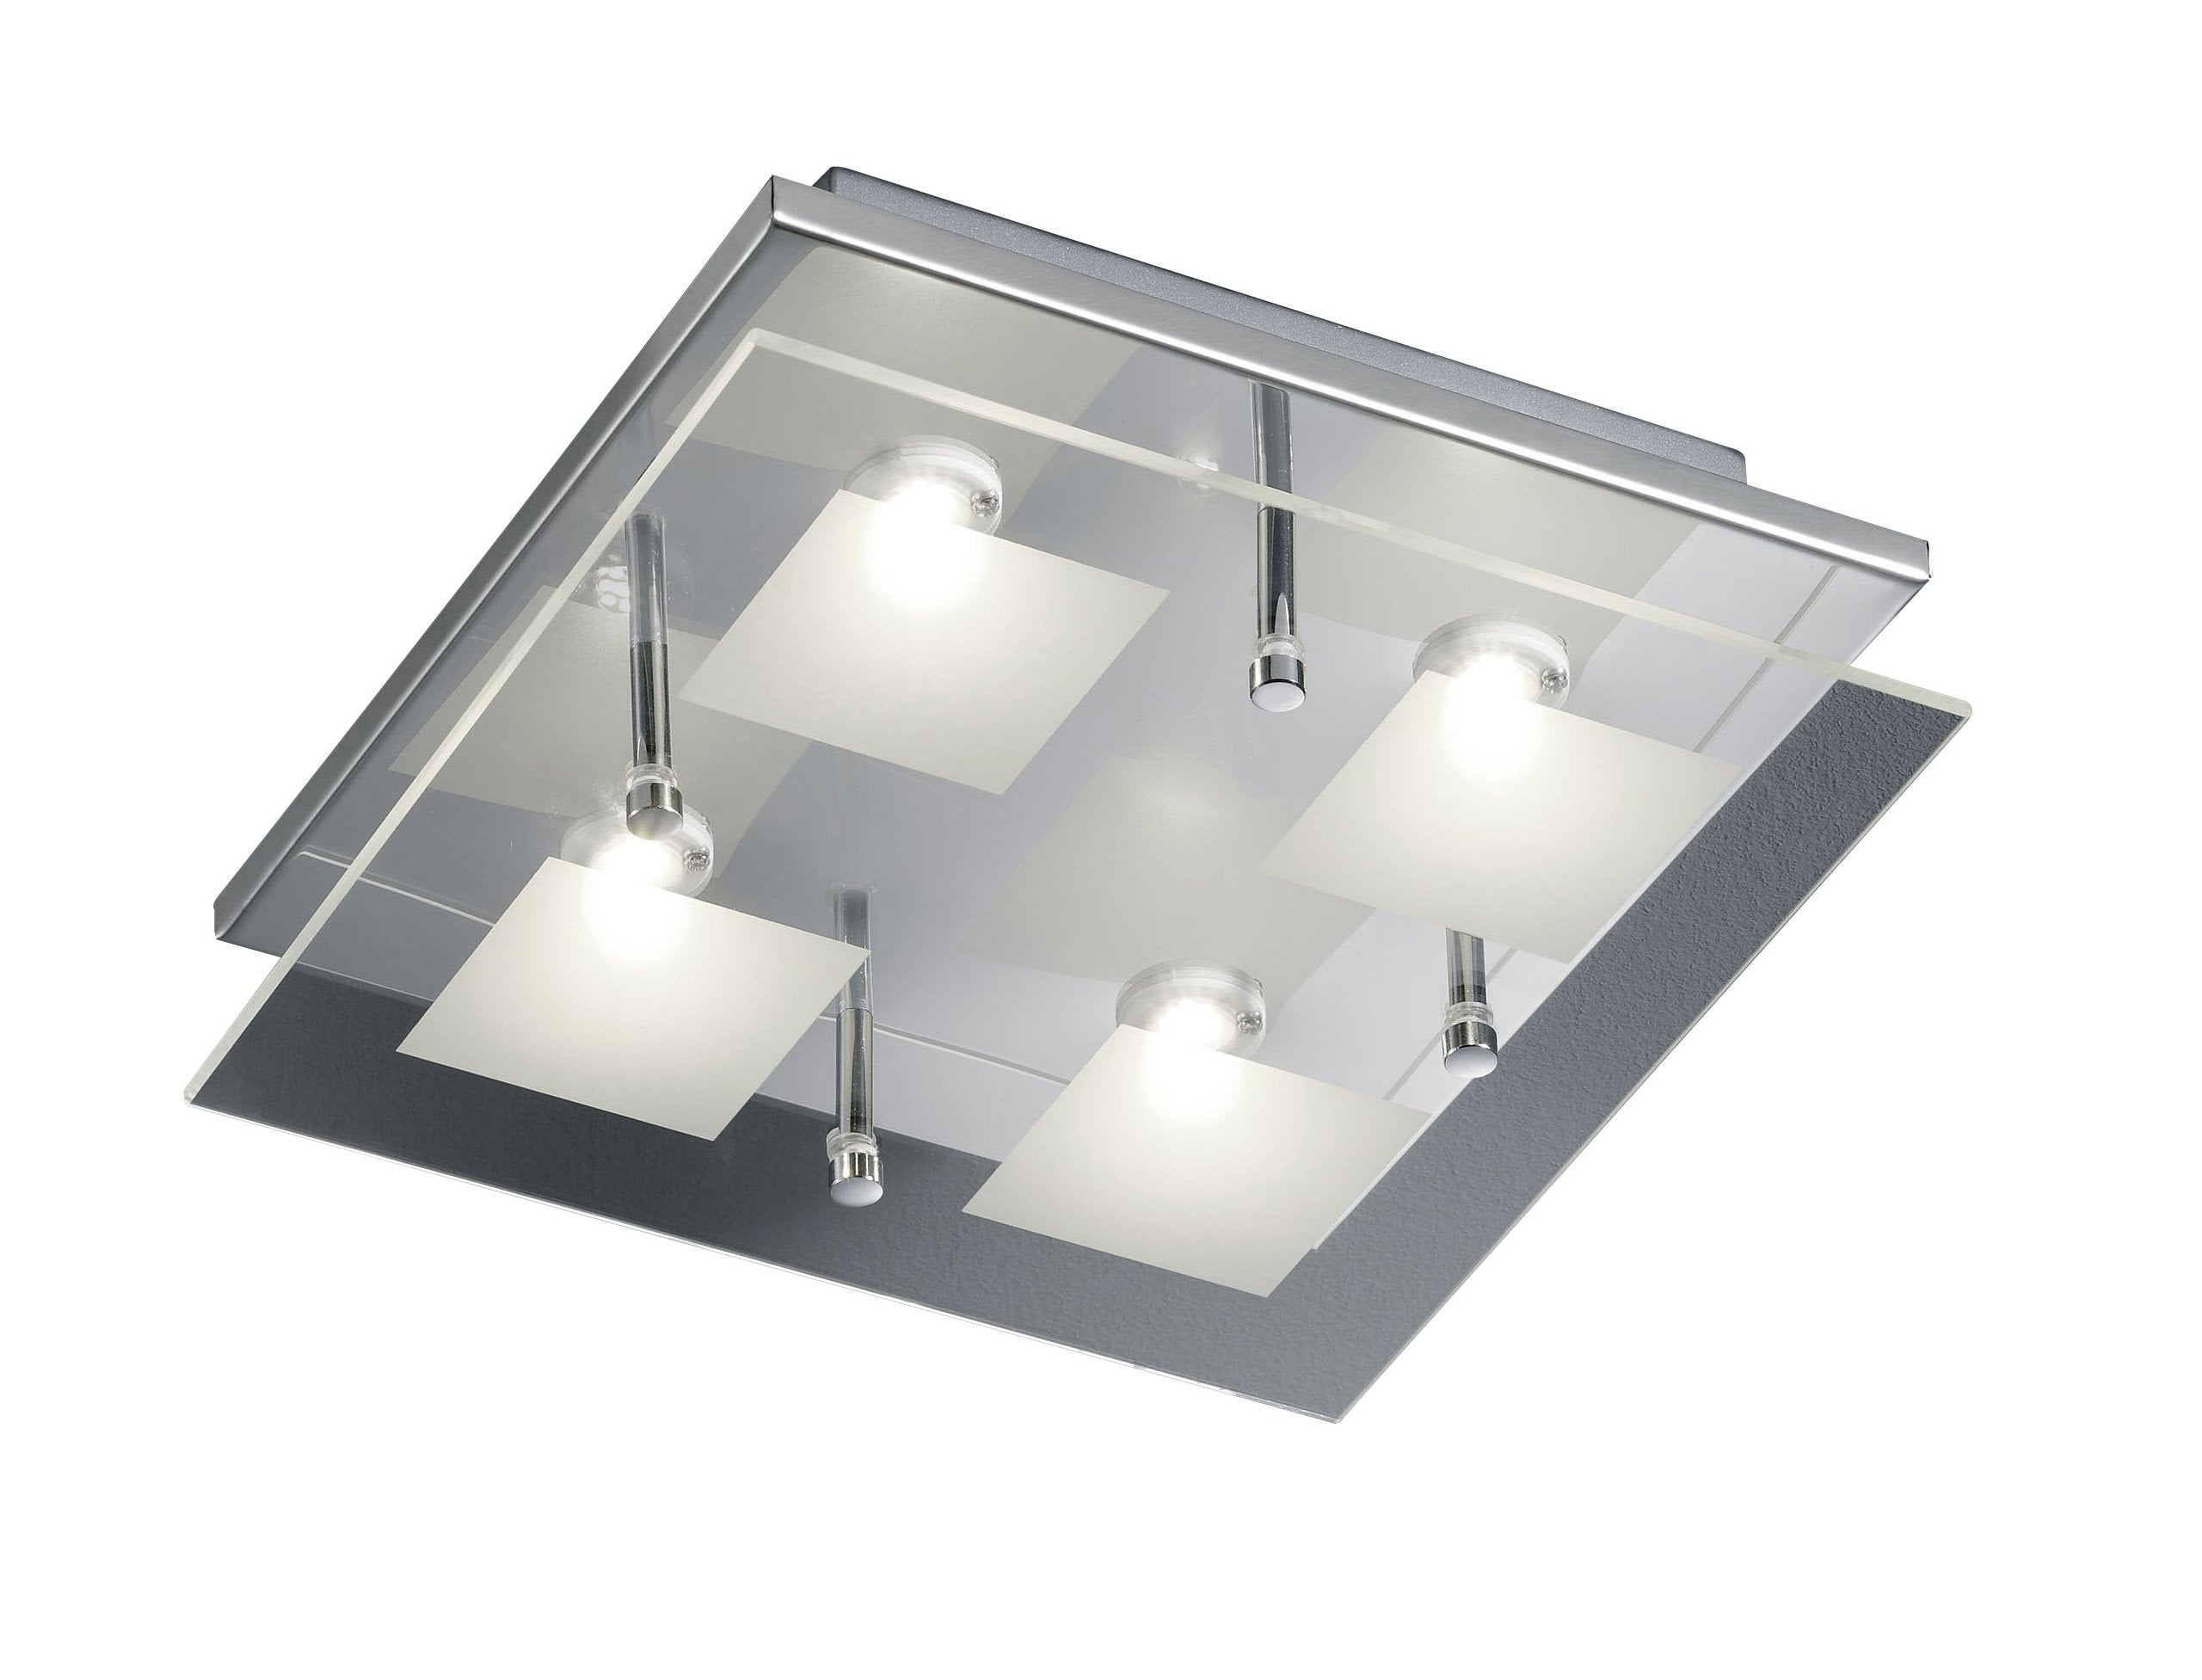 4 SQUARE CEILING LIGHT - 4 X 4.5W OSRAM LED - CLEAR/SATINATED GLASS